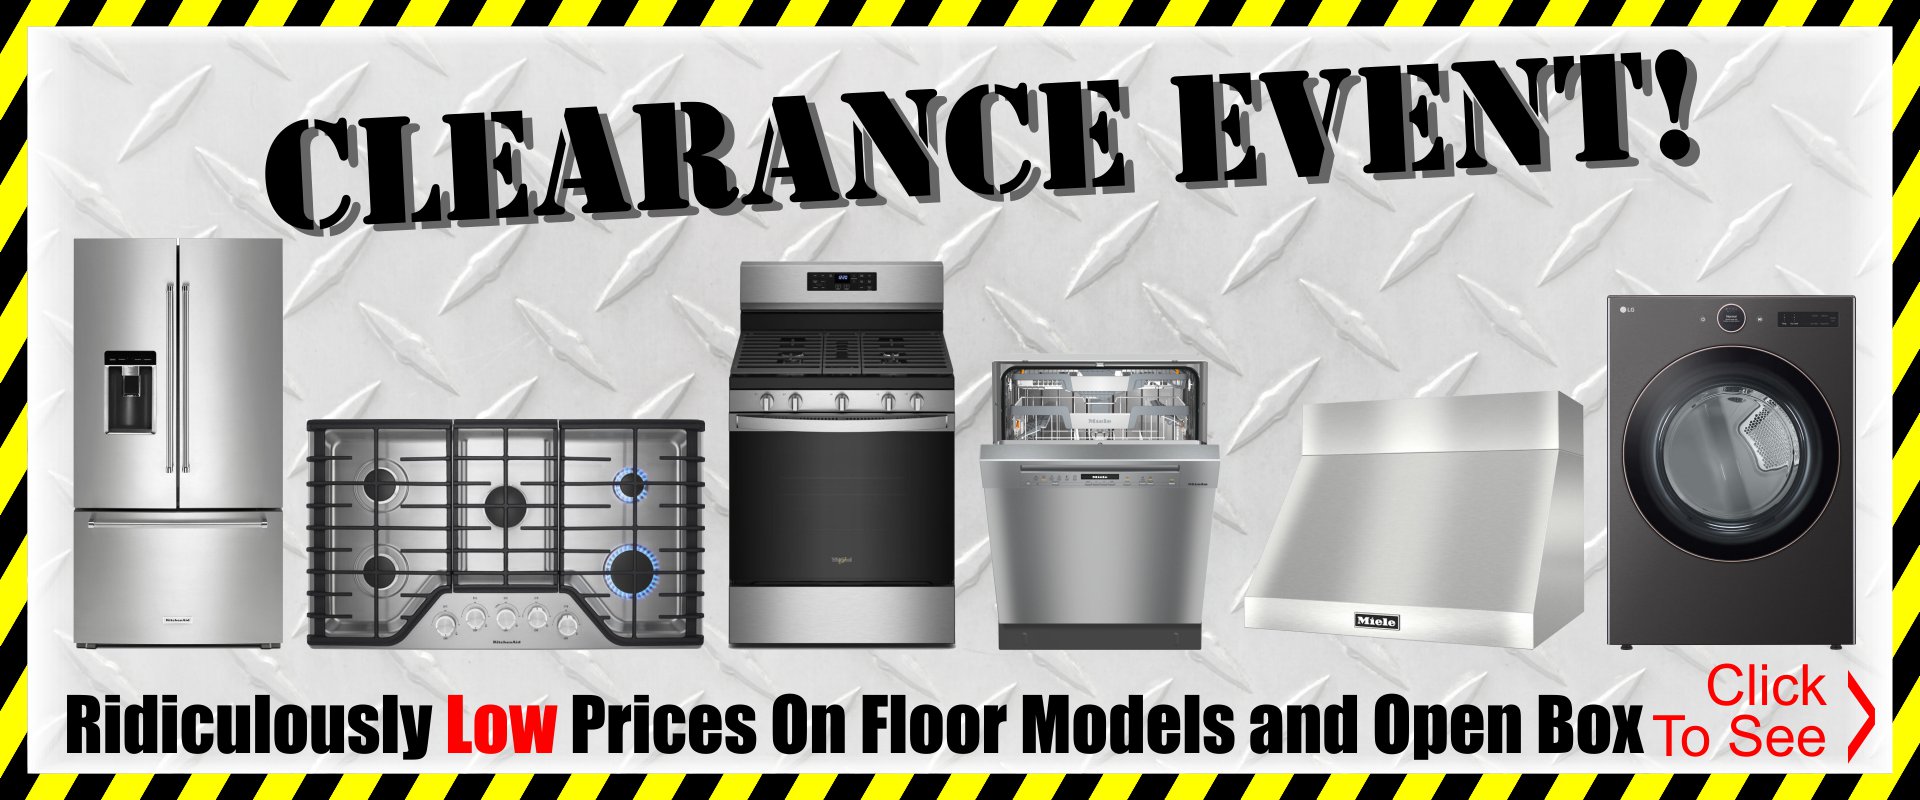  Appliances, Massage Chairs, Grills, And More in